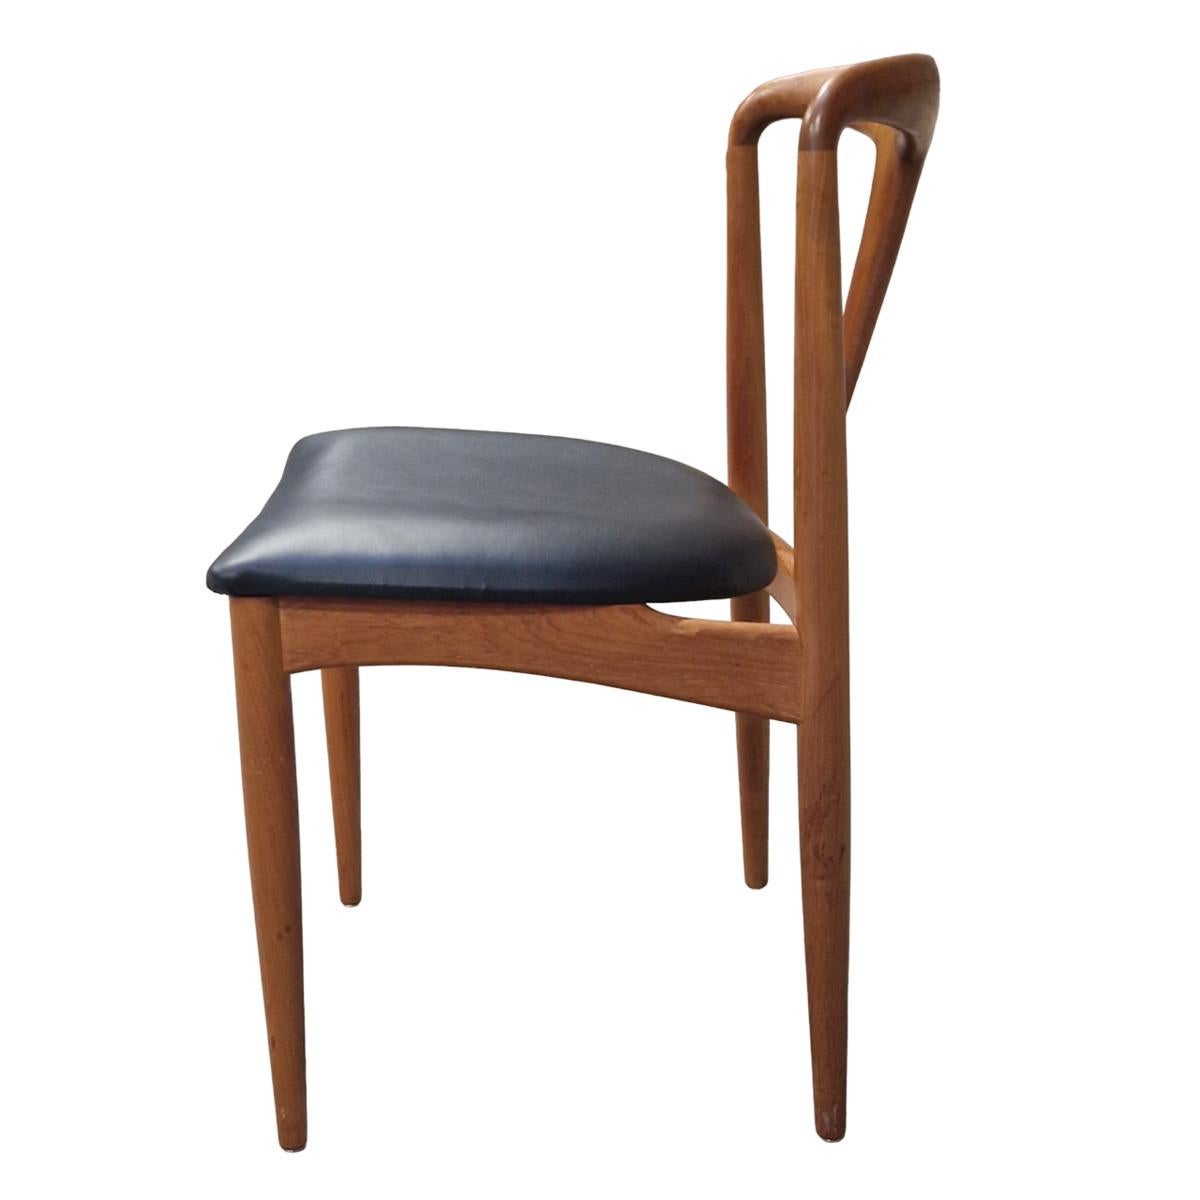 Johannès Andrsen was a woodworker from the first hals of the 20th century. He is particularly attracted to smooth shapes, curvy and organic movements. This translates into most of his work. These chairs for example have a soft rounded back. This set